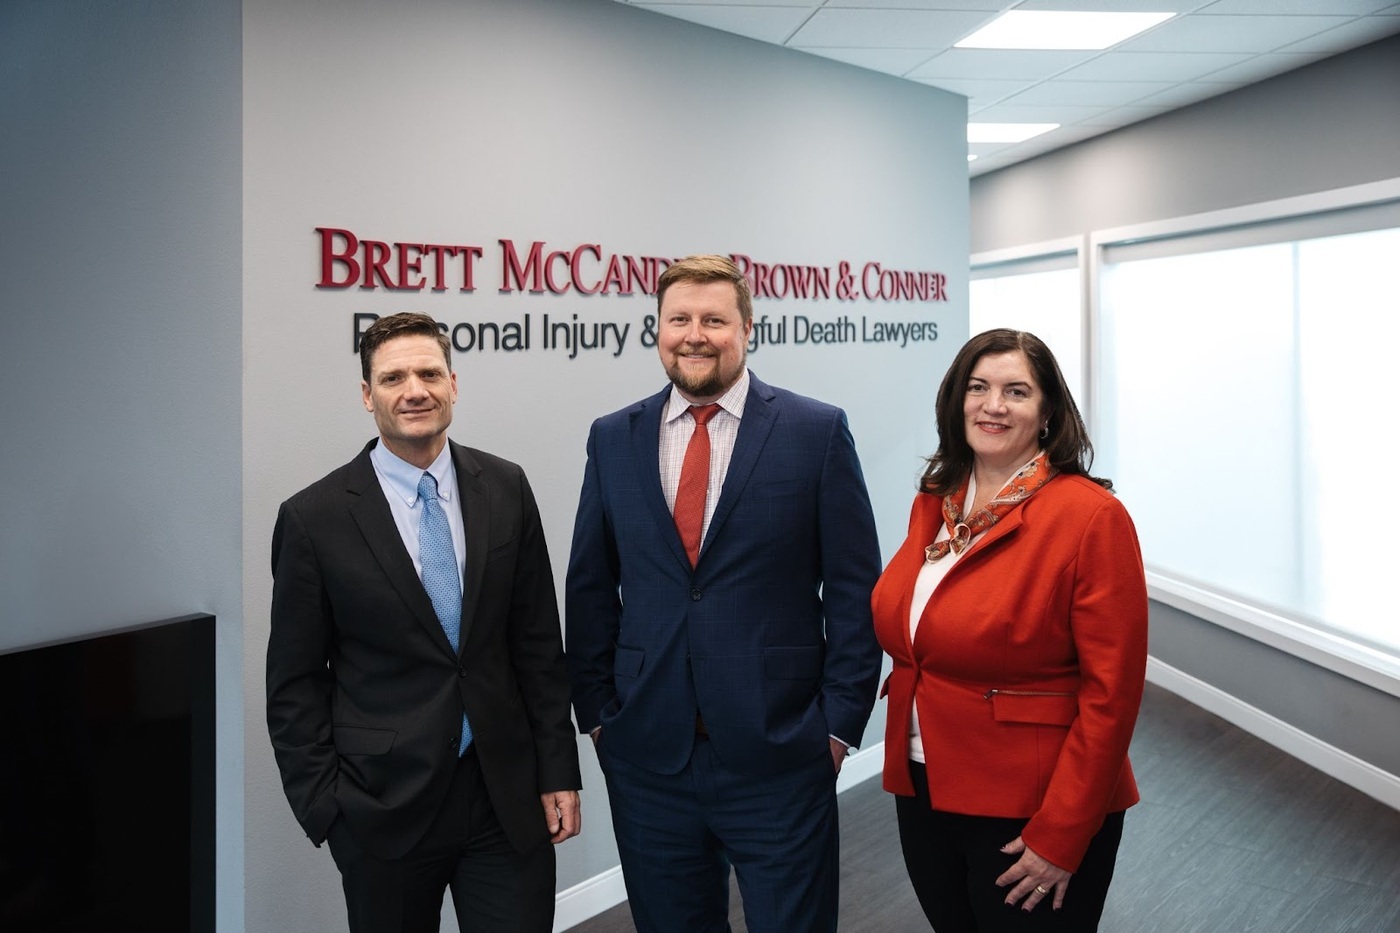 Brett McCandalis Brown & Conner PLLC specializes in personal injury law, with a strong track record of successful outcomes, especially in personal injury and car accident cases.